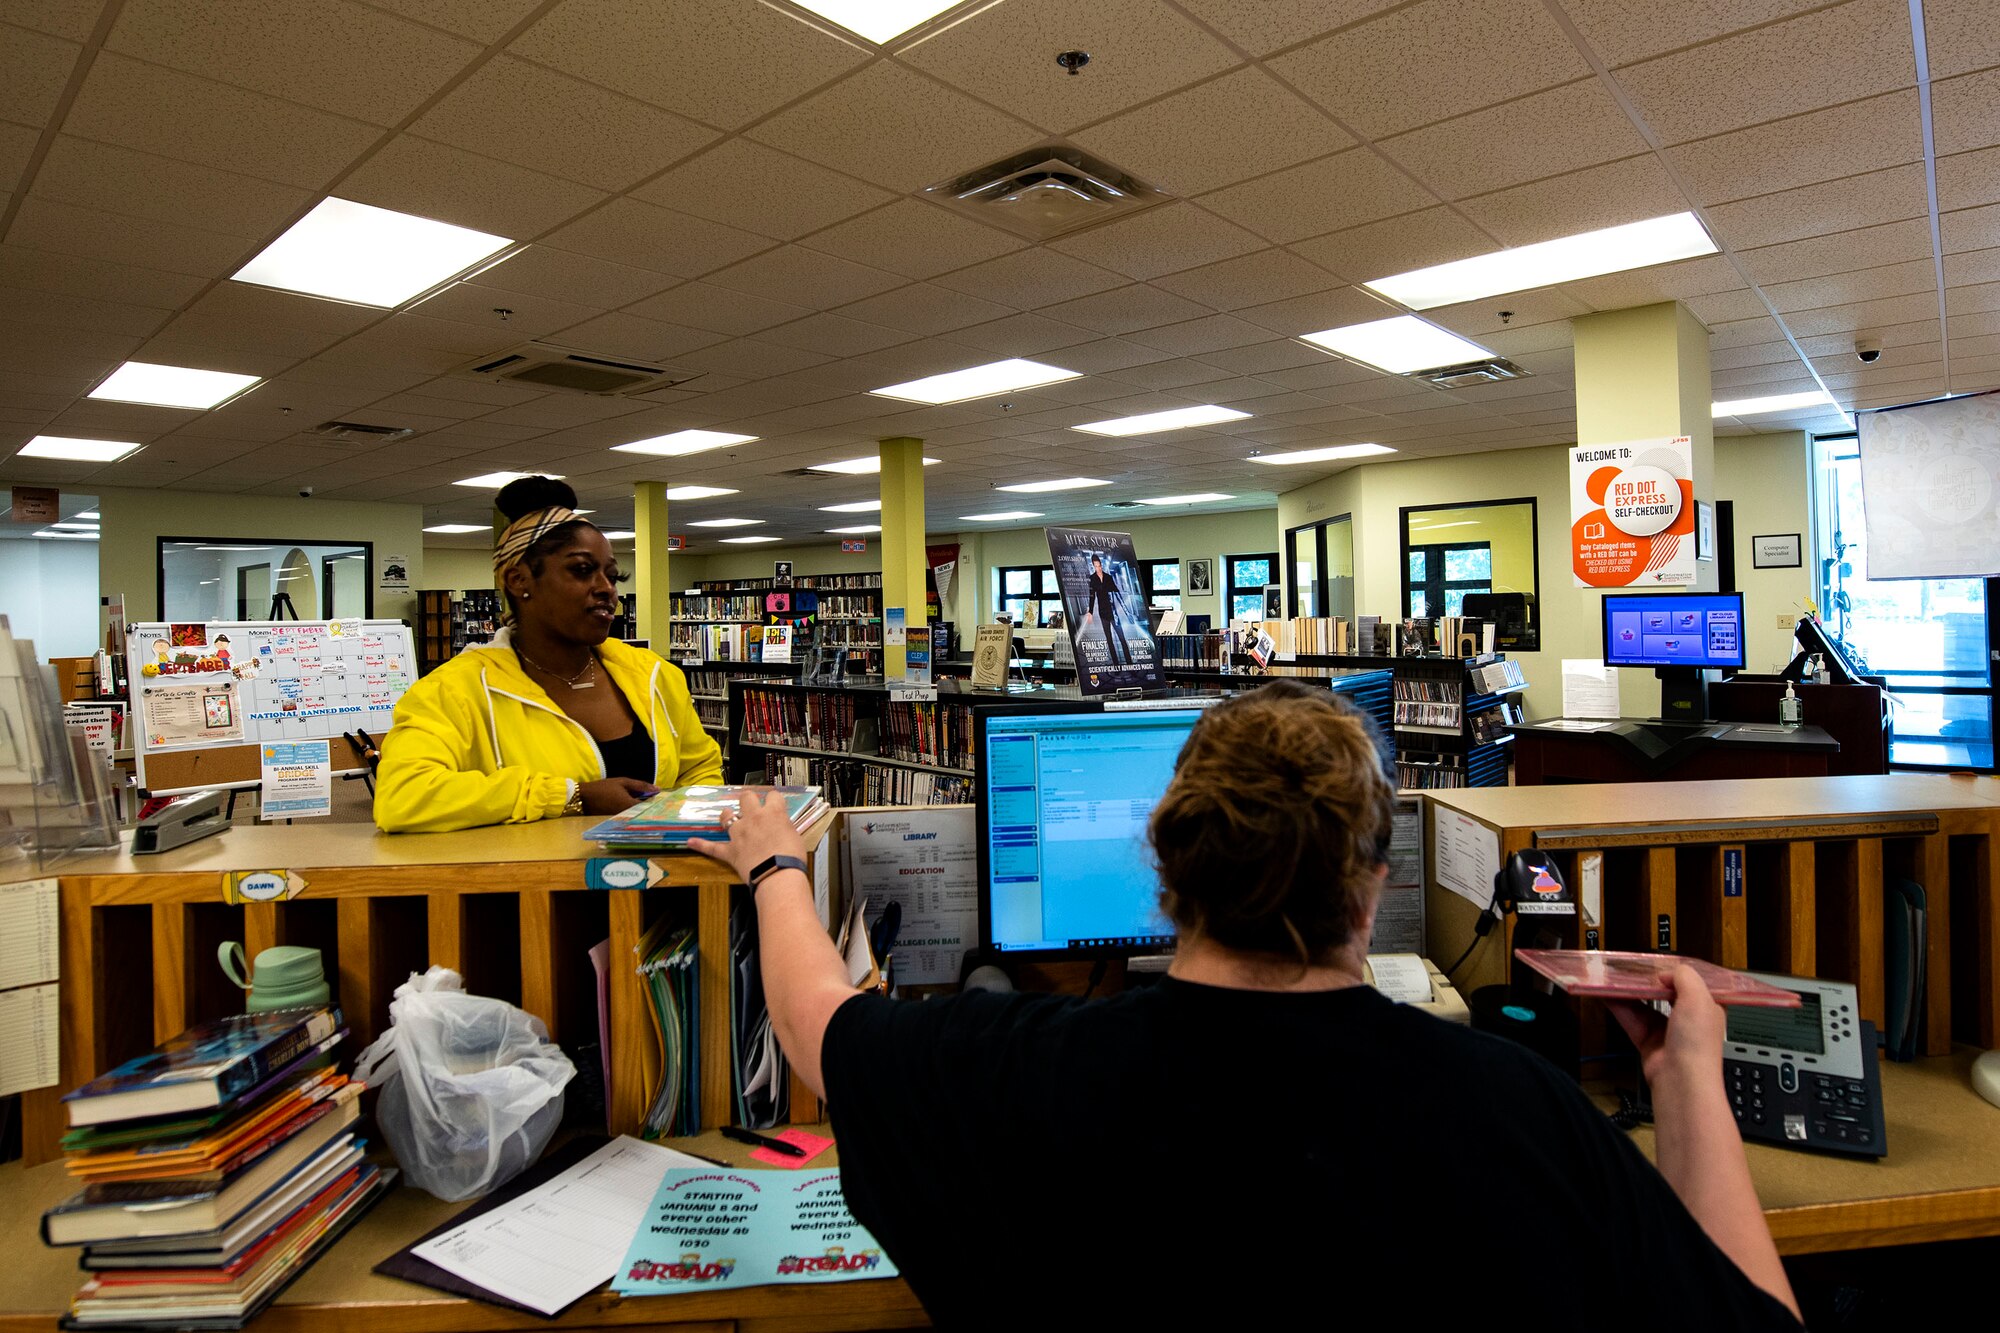 Katrina True, right, 23d Force Support Squadron library aid, checks books out to Candice Wilson, 23d Medical Group appointment clerk and military spouse, Sept. 6, 2019, at Moody Air Force Base, Ga. The Information Learning Center provides a means of morale and serves as the central hub for all informational and educational growth for Airmen and families. (U.S. Air Force photo by Senior Airman Erick Requadt)